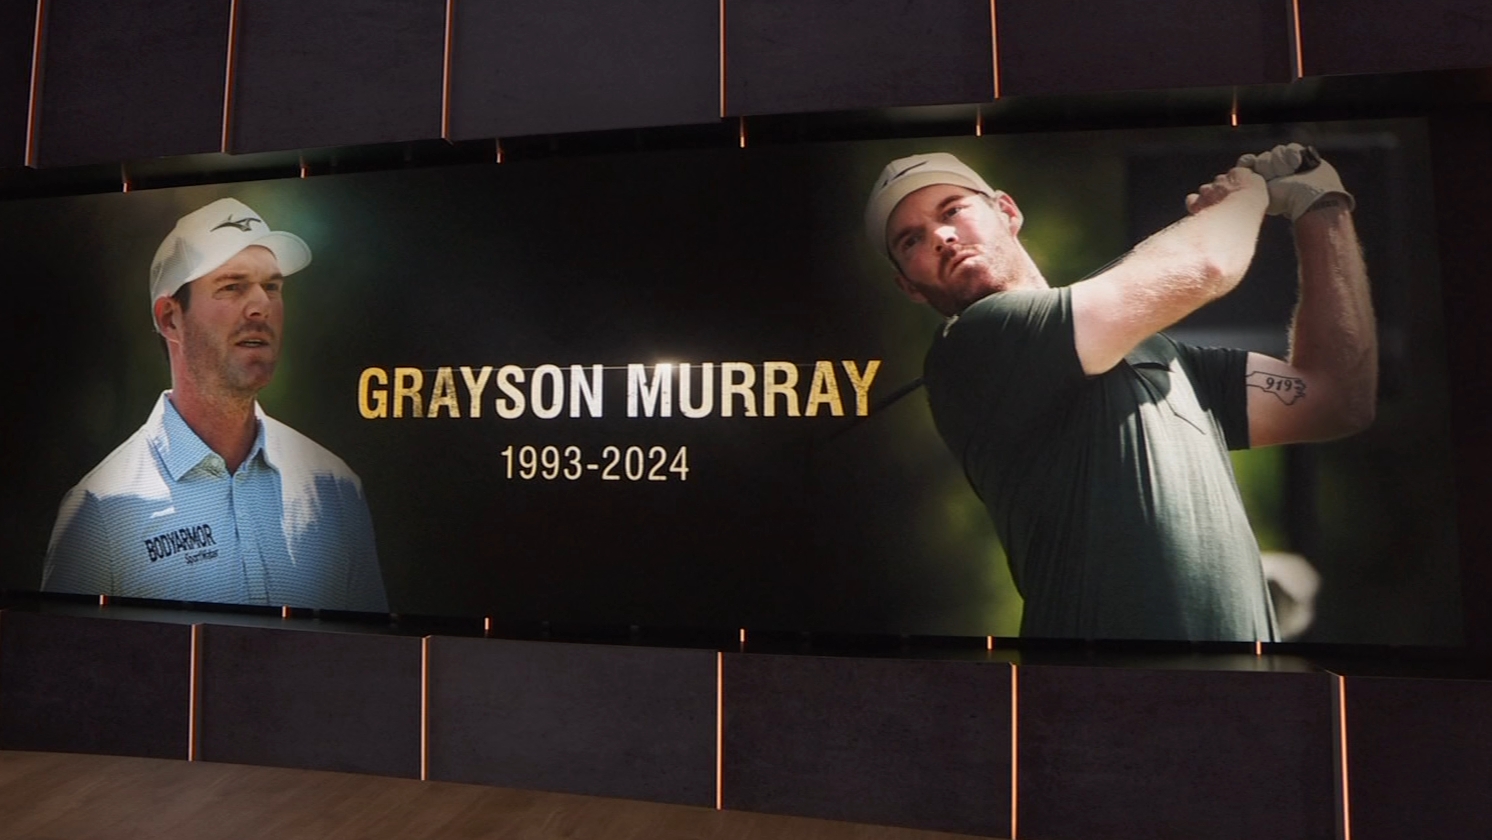 Golfers pay tribute to Grayson Murray